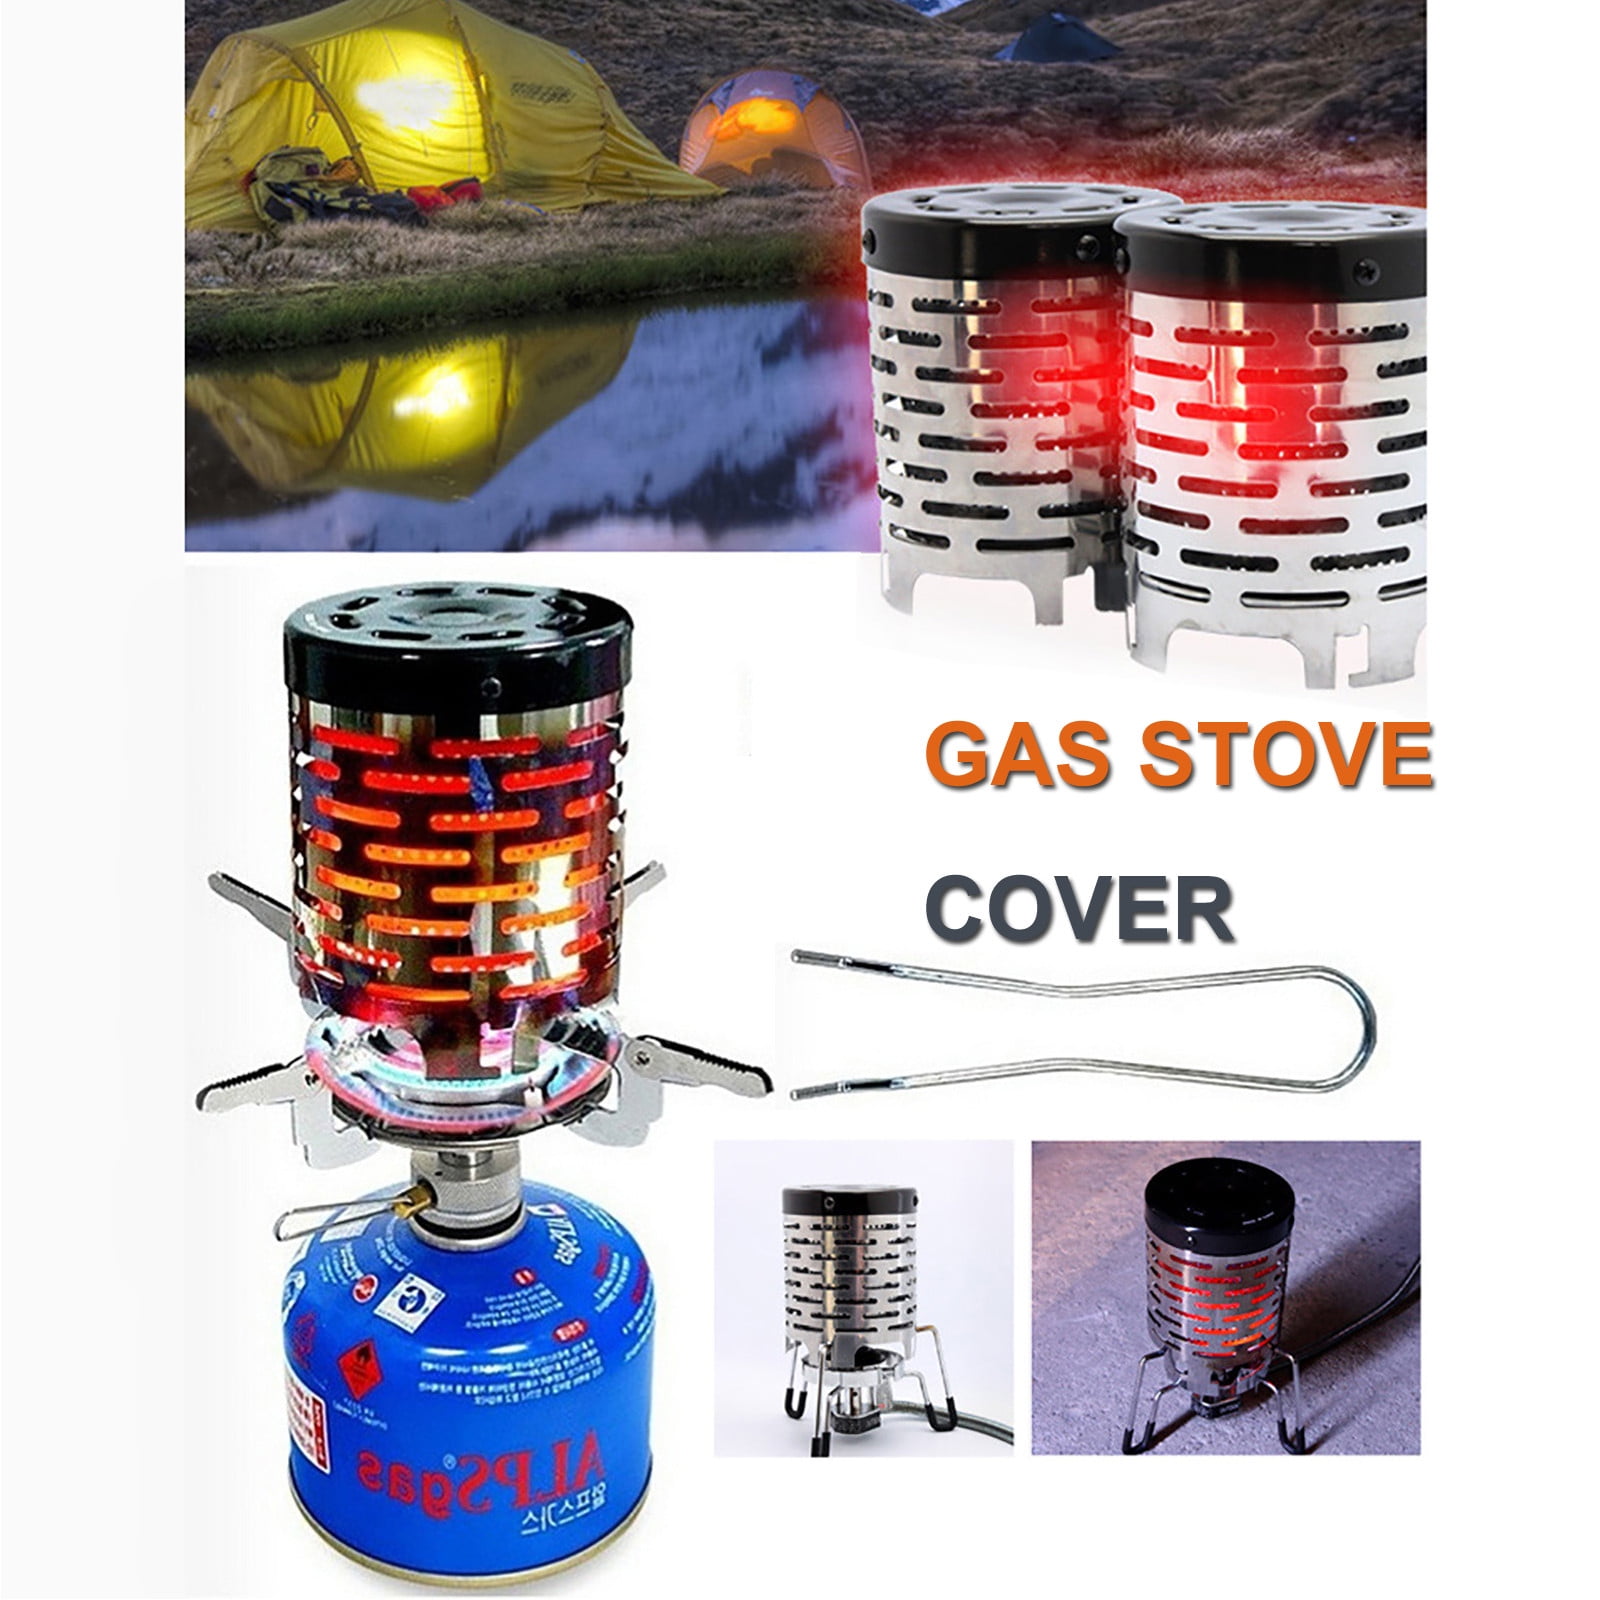 Lixada Outdoor Camping Gas Heater Portable Dual Purpose Gas Heating Warmer Cooking Stove Indoor/Outdoor-Safe Portable Propane Radiant Heater